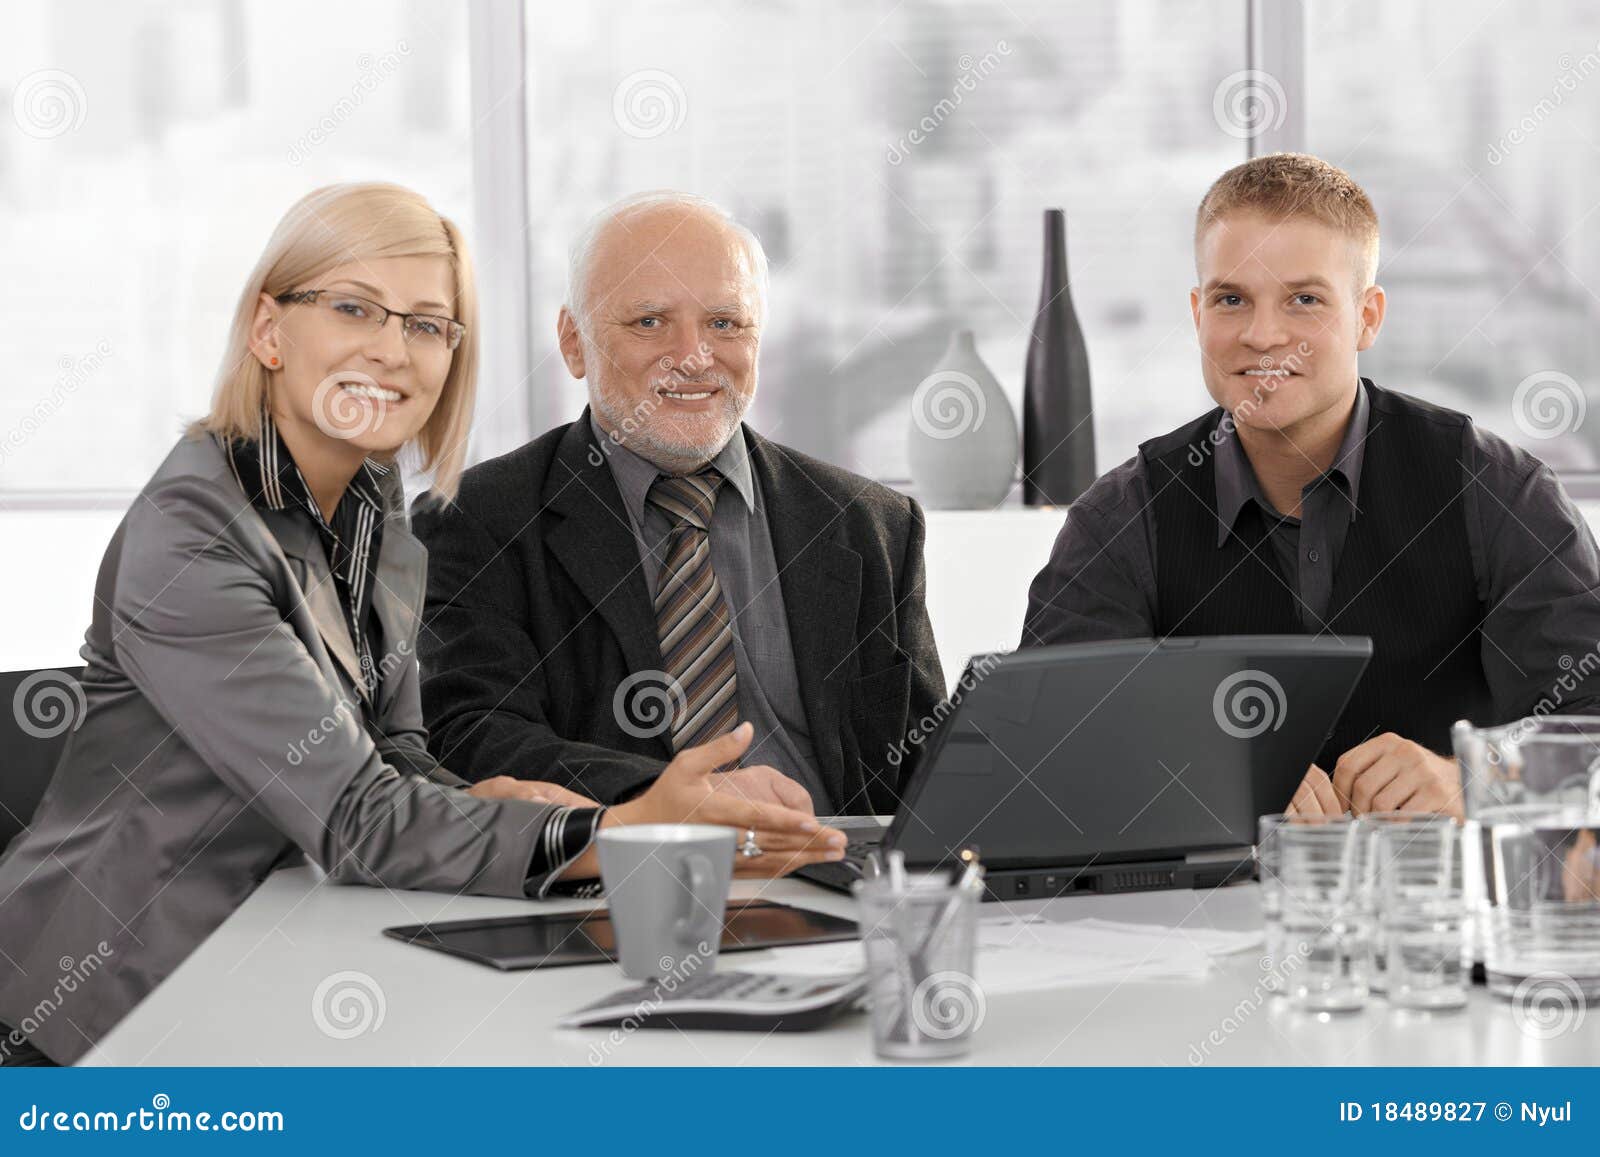 Meeting With Senior Executive Stock Image Image Of Businesswoman Businesspeople 18489827